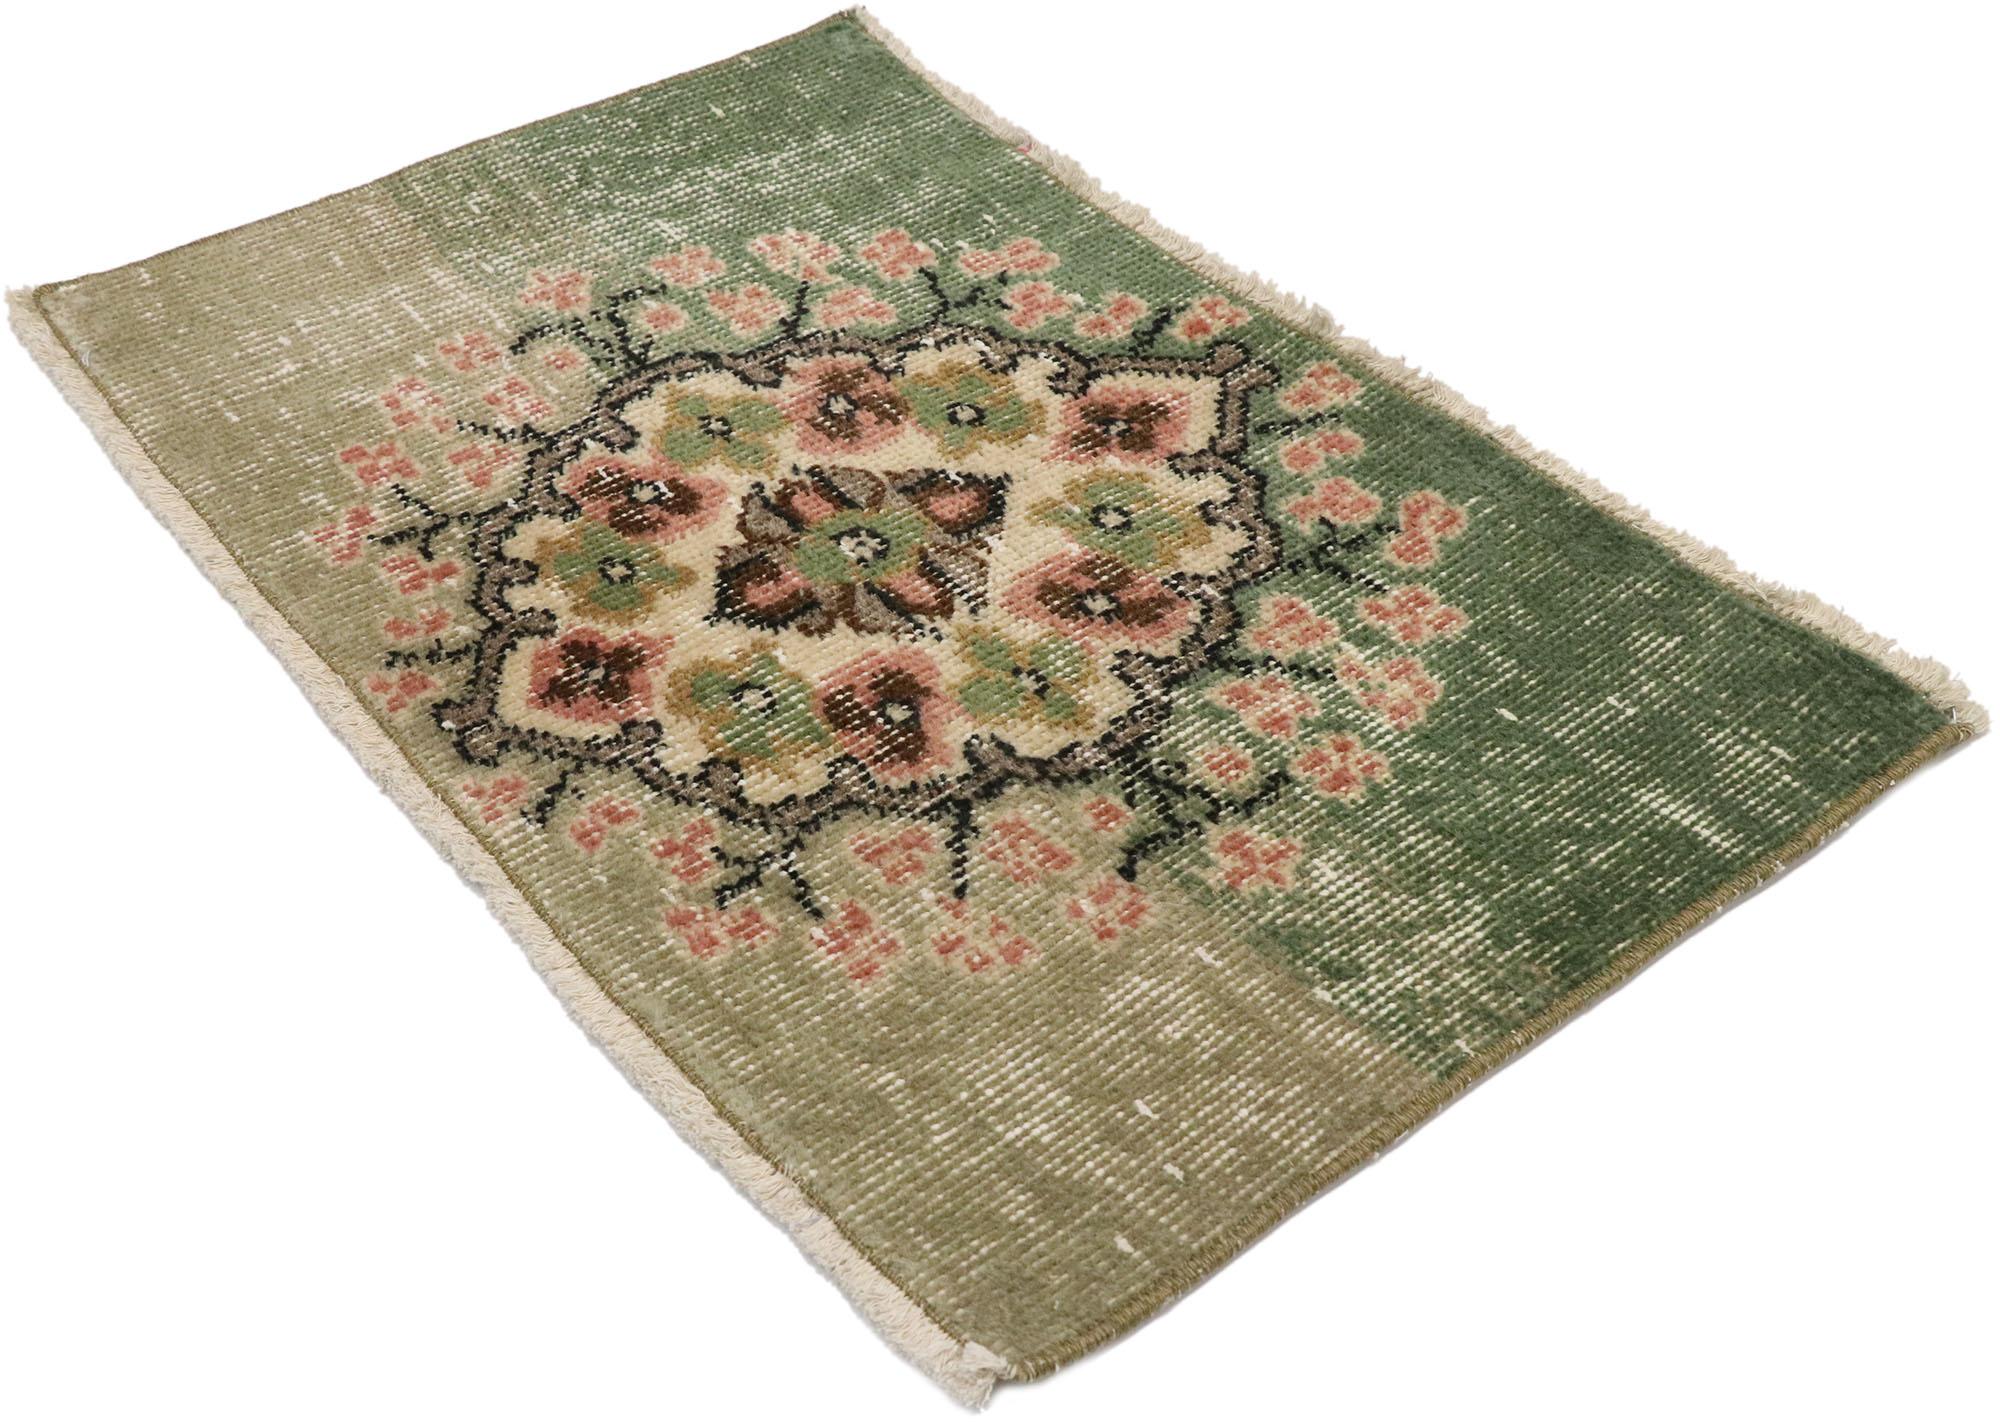 53313, distressed vintage Turkish Sivas rug with romantic English country cottage style. This hand knotted wool distressed vintage Turkish Sivas rug features a lovingly time-worn abrashed field festooned with a gorgeous floral botanical medallion